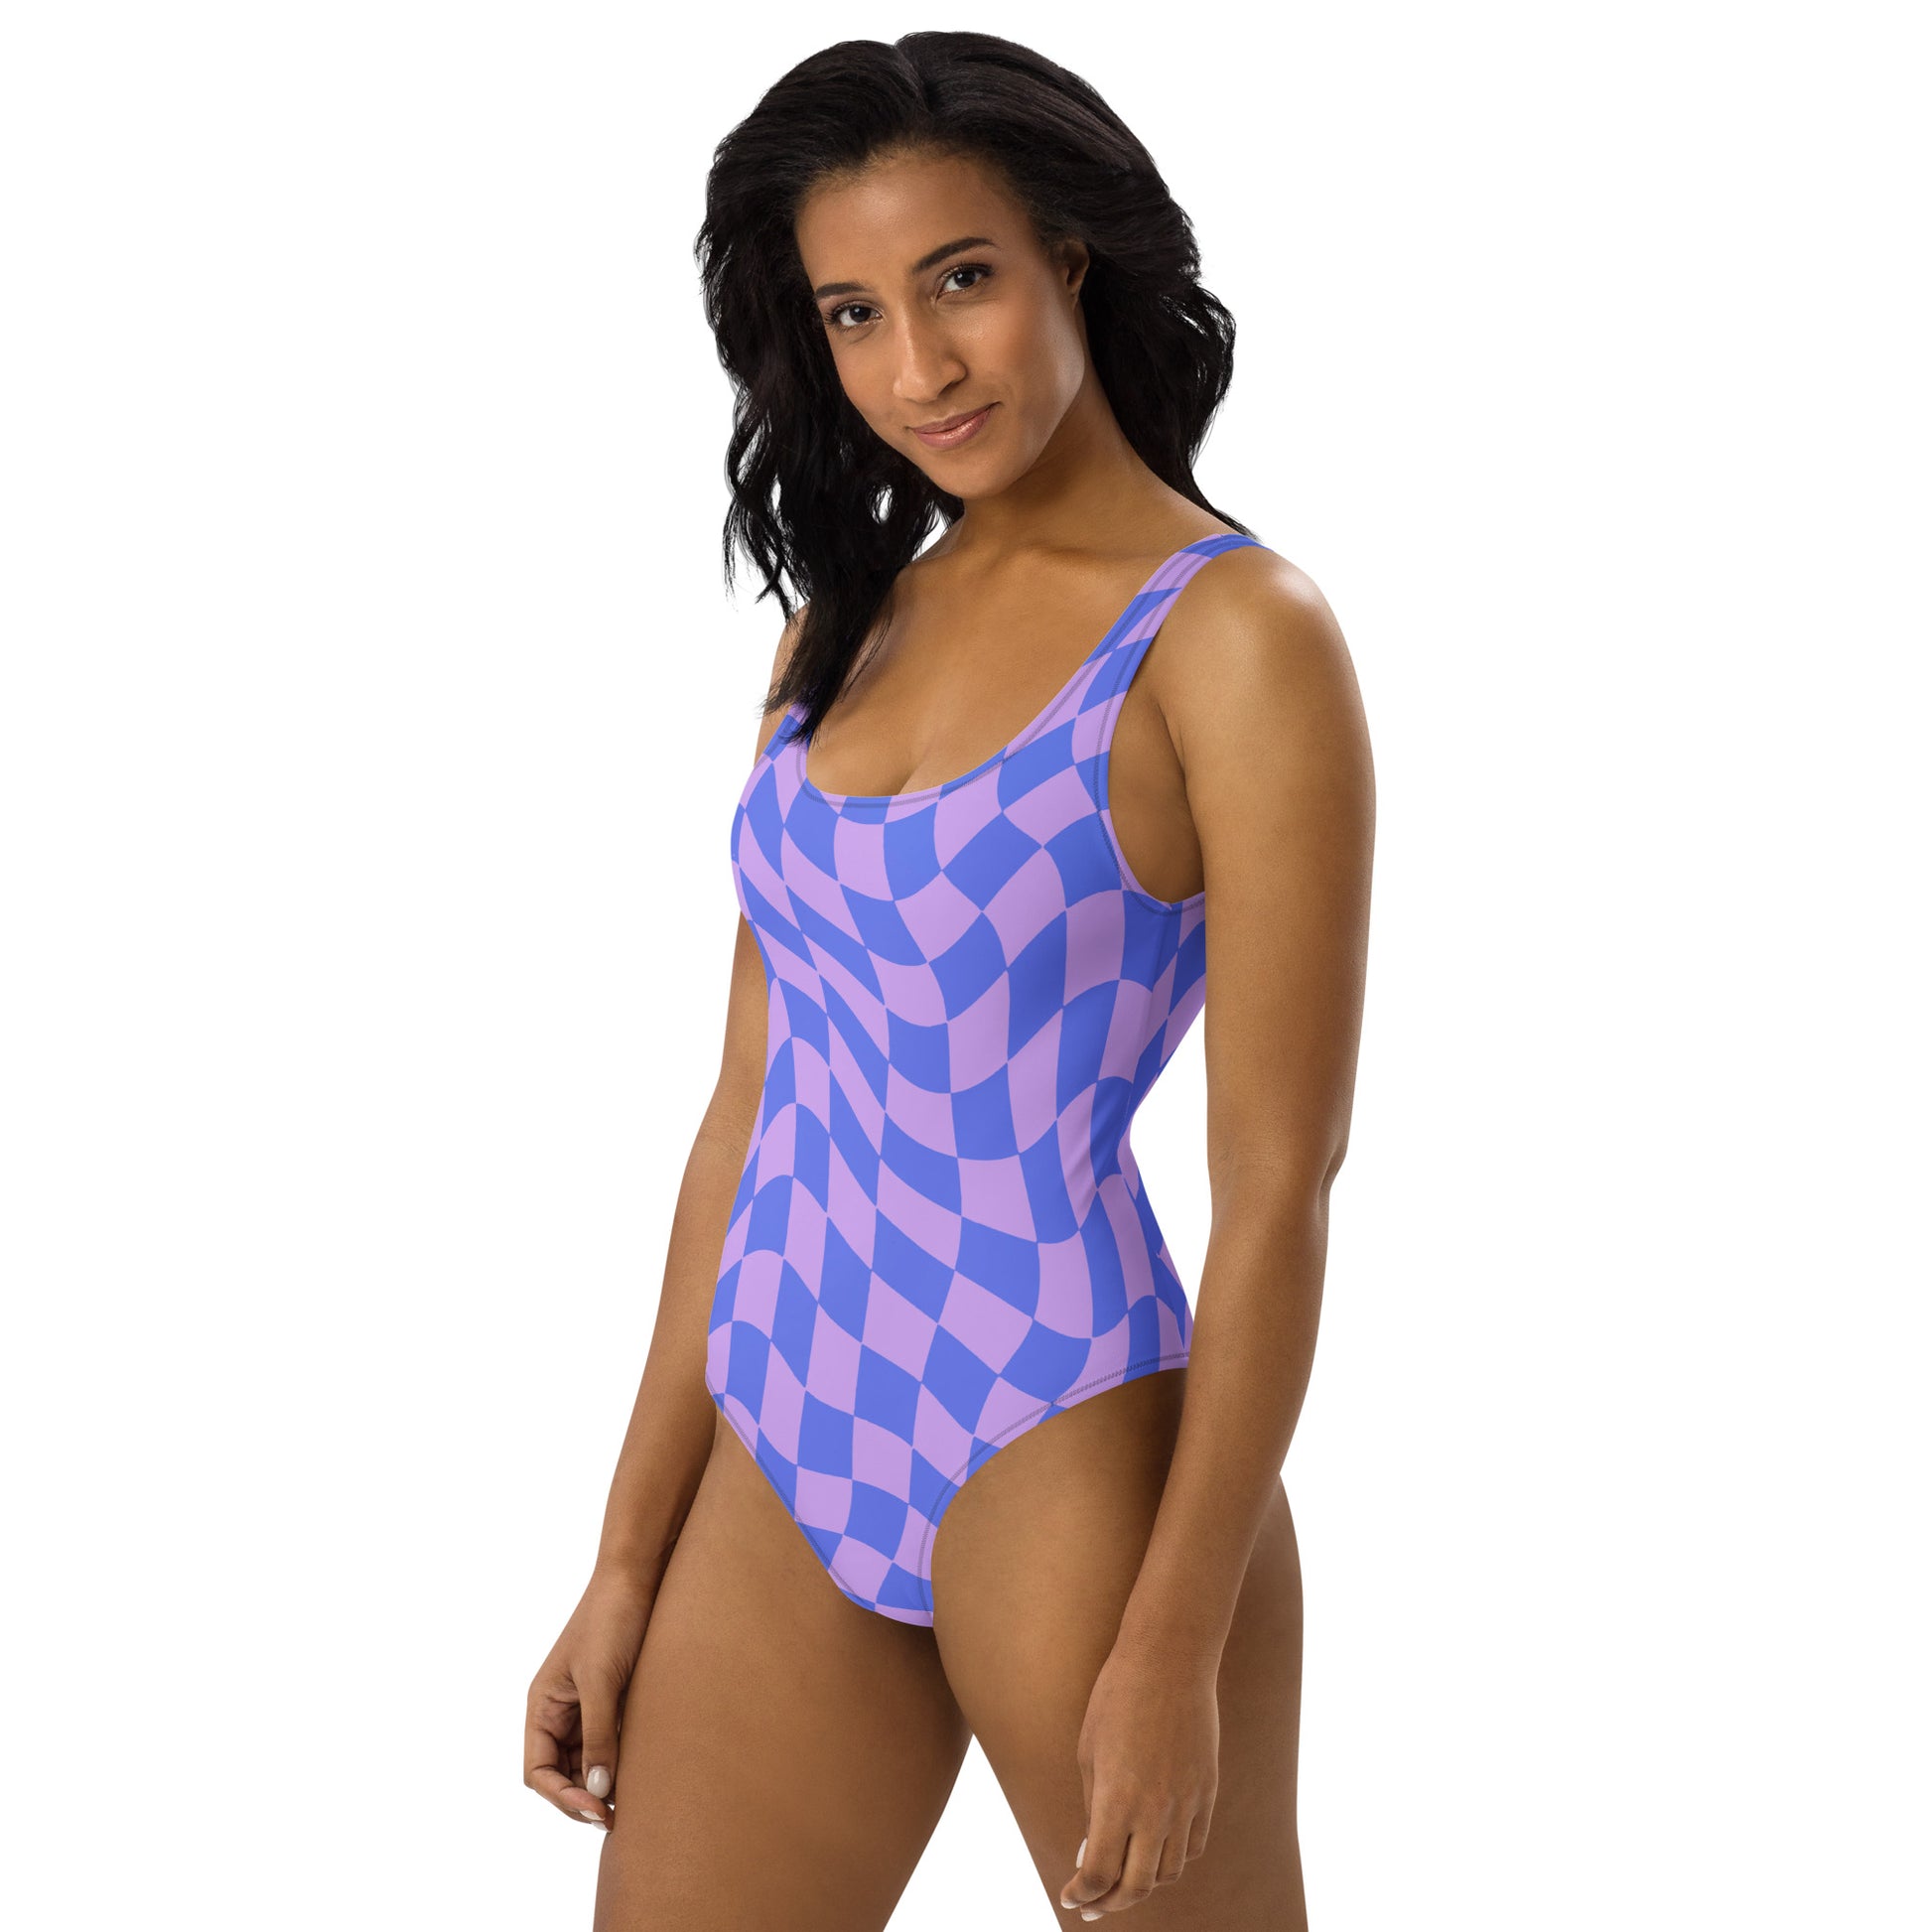 Groovy Checkered One Piece Swimsuit for Women, 70s Funky Pink Purple Check Trippy Designer Swim Swimming Bathing Suits Body Swimwear Starcove Fashion